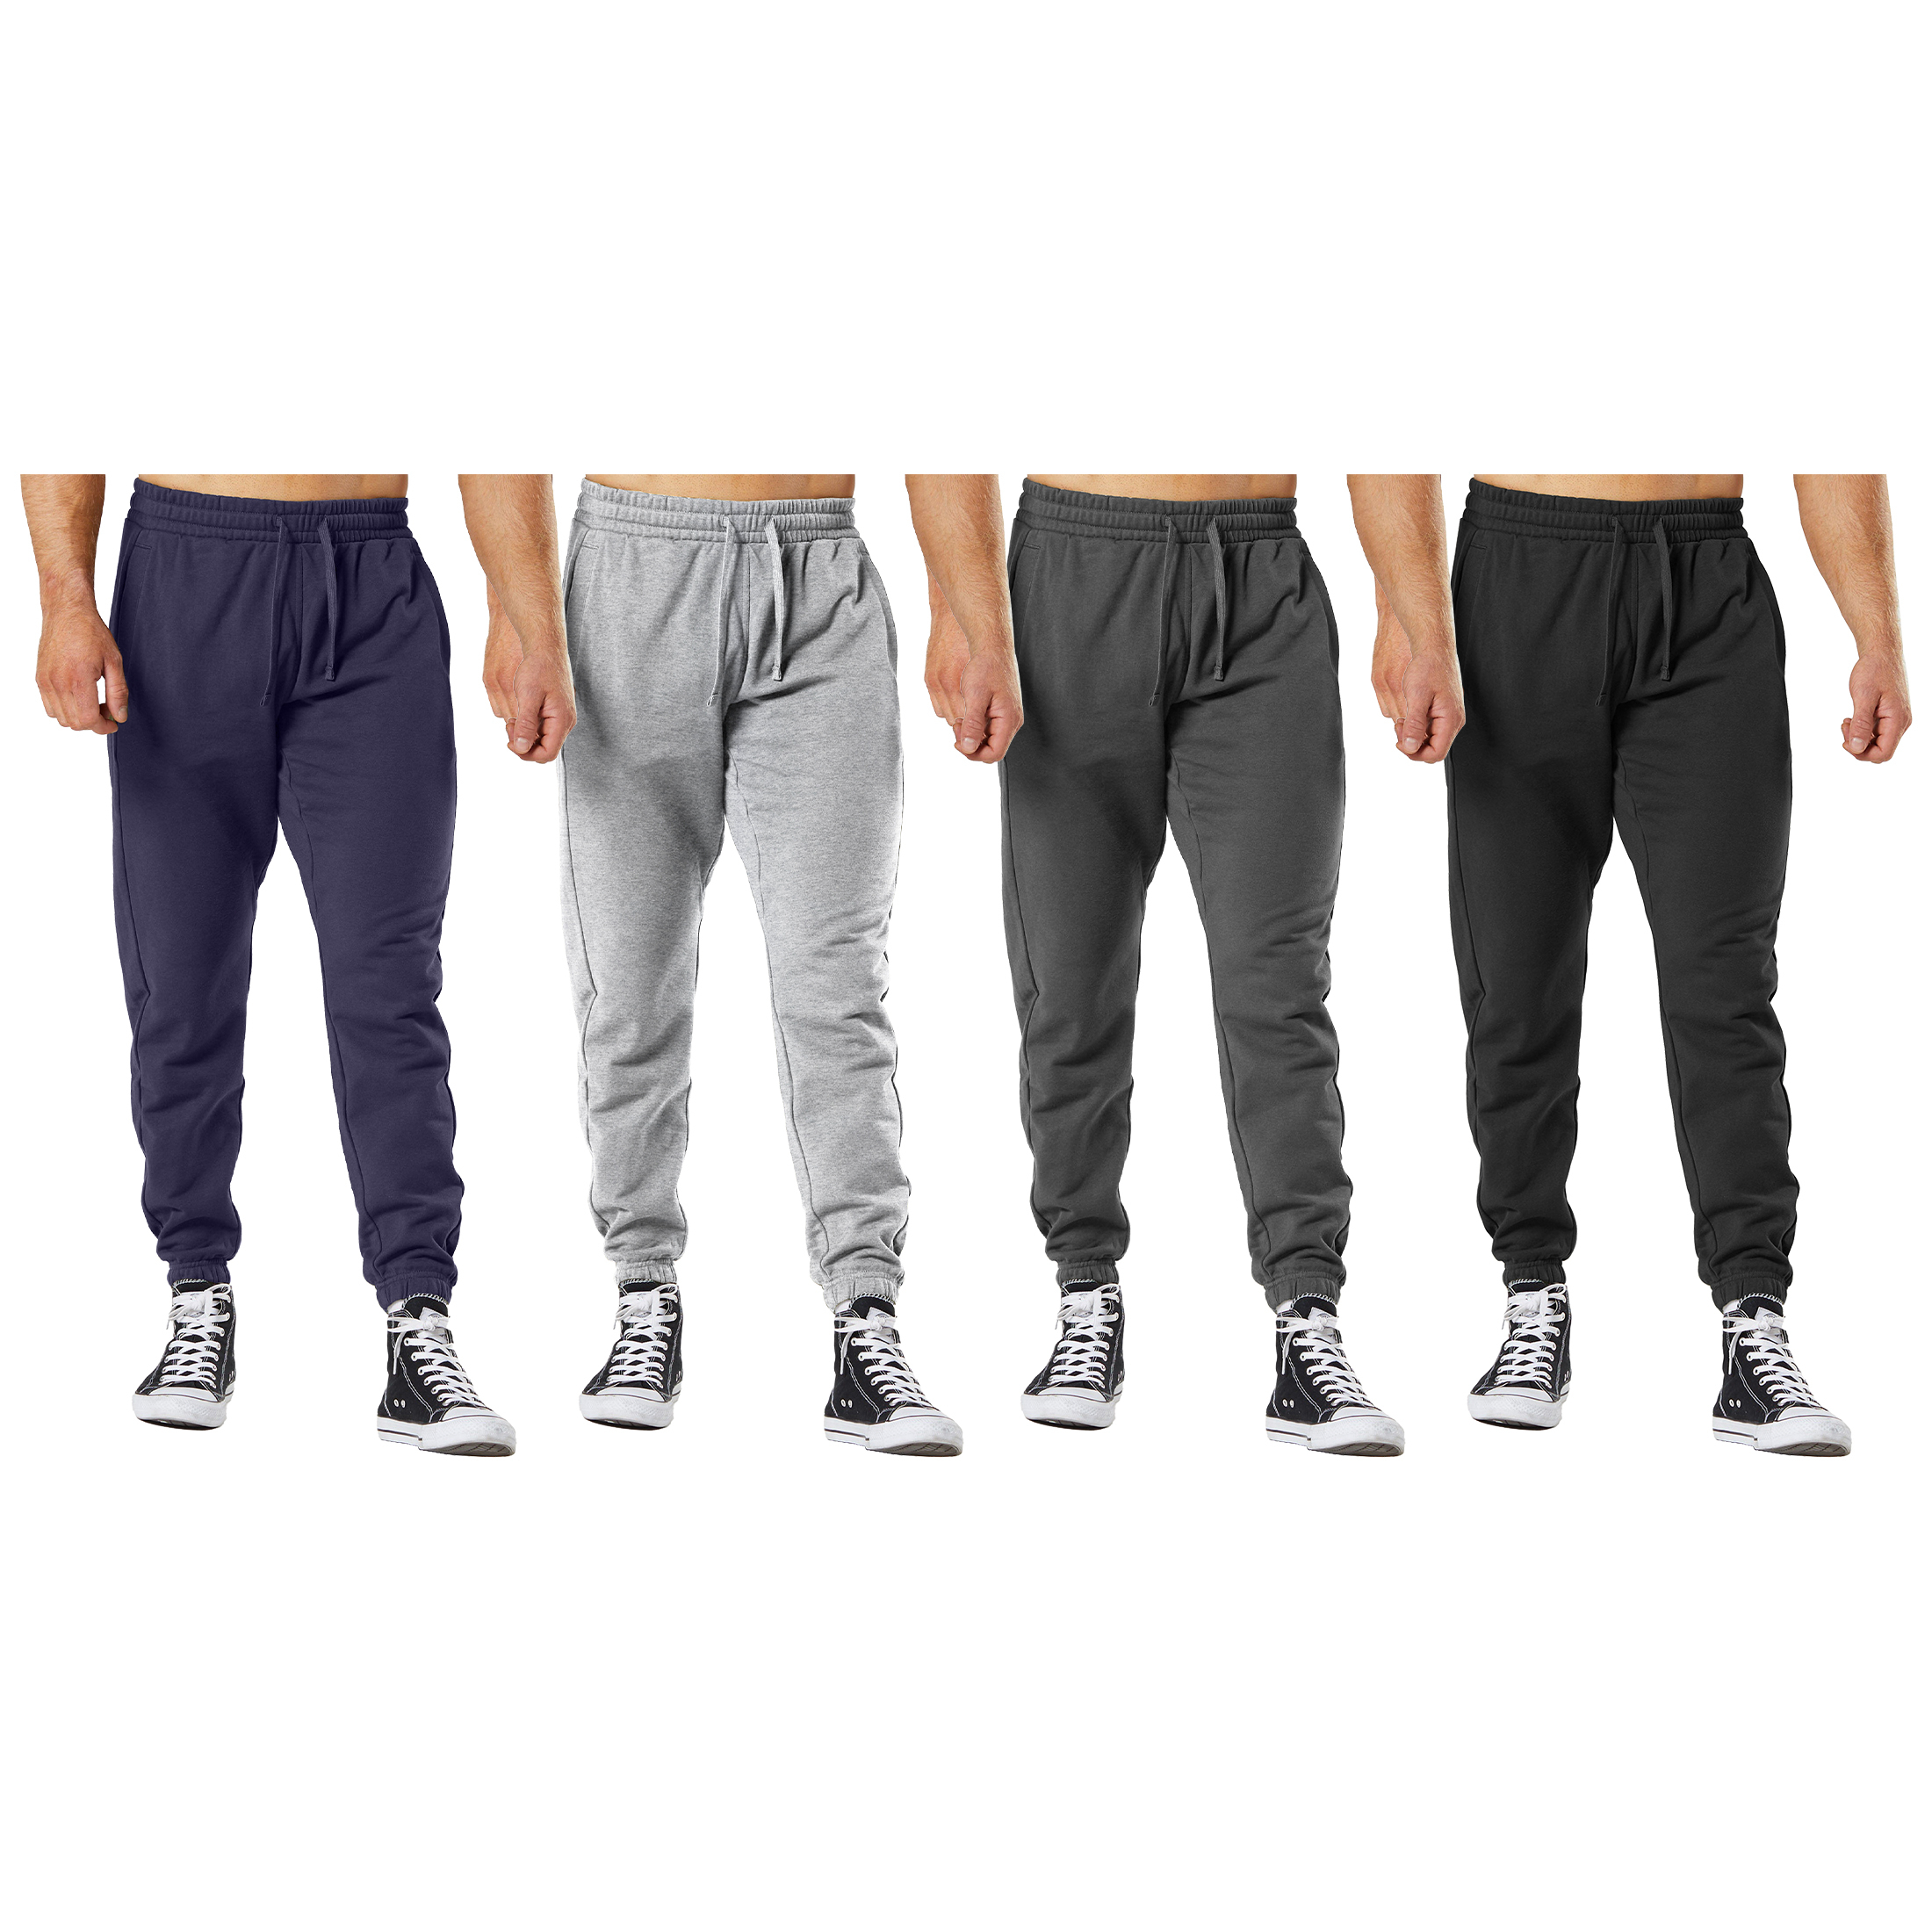 4-Pack: Men's Casual Fleece-Lined Elastic Bottom Jogger Pants With Pockets - Small